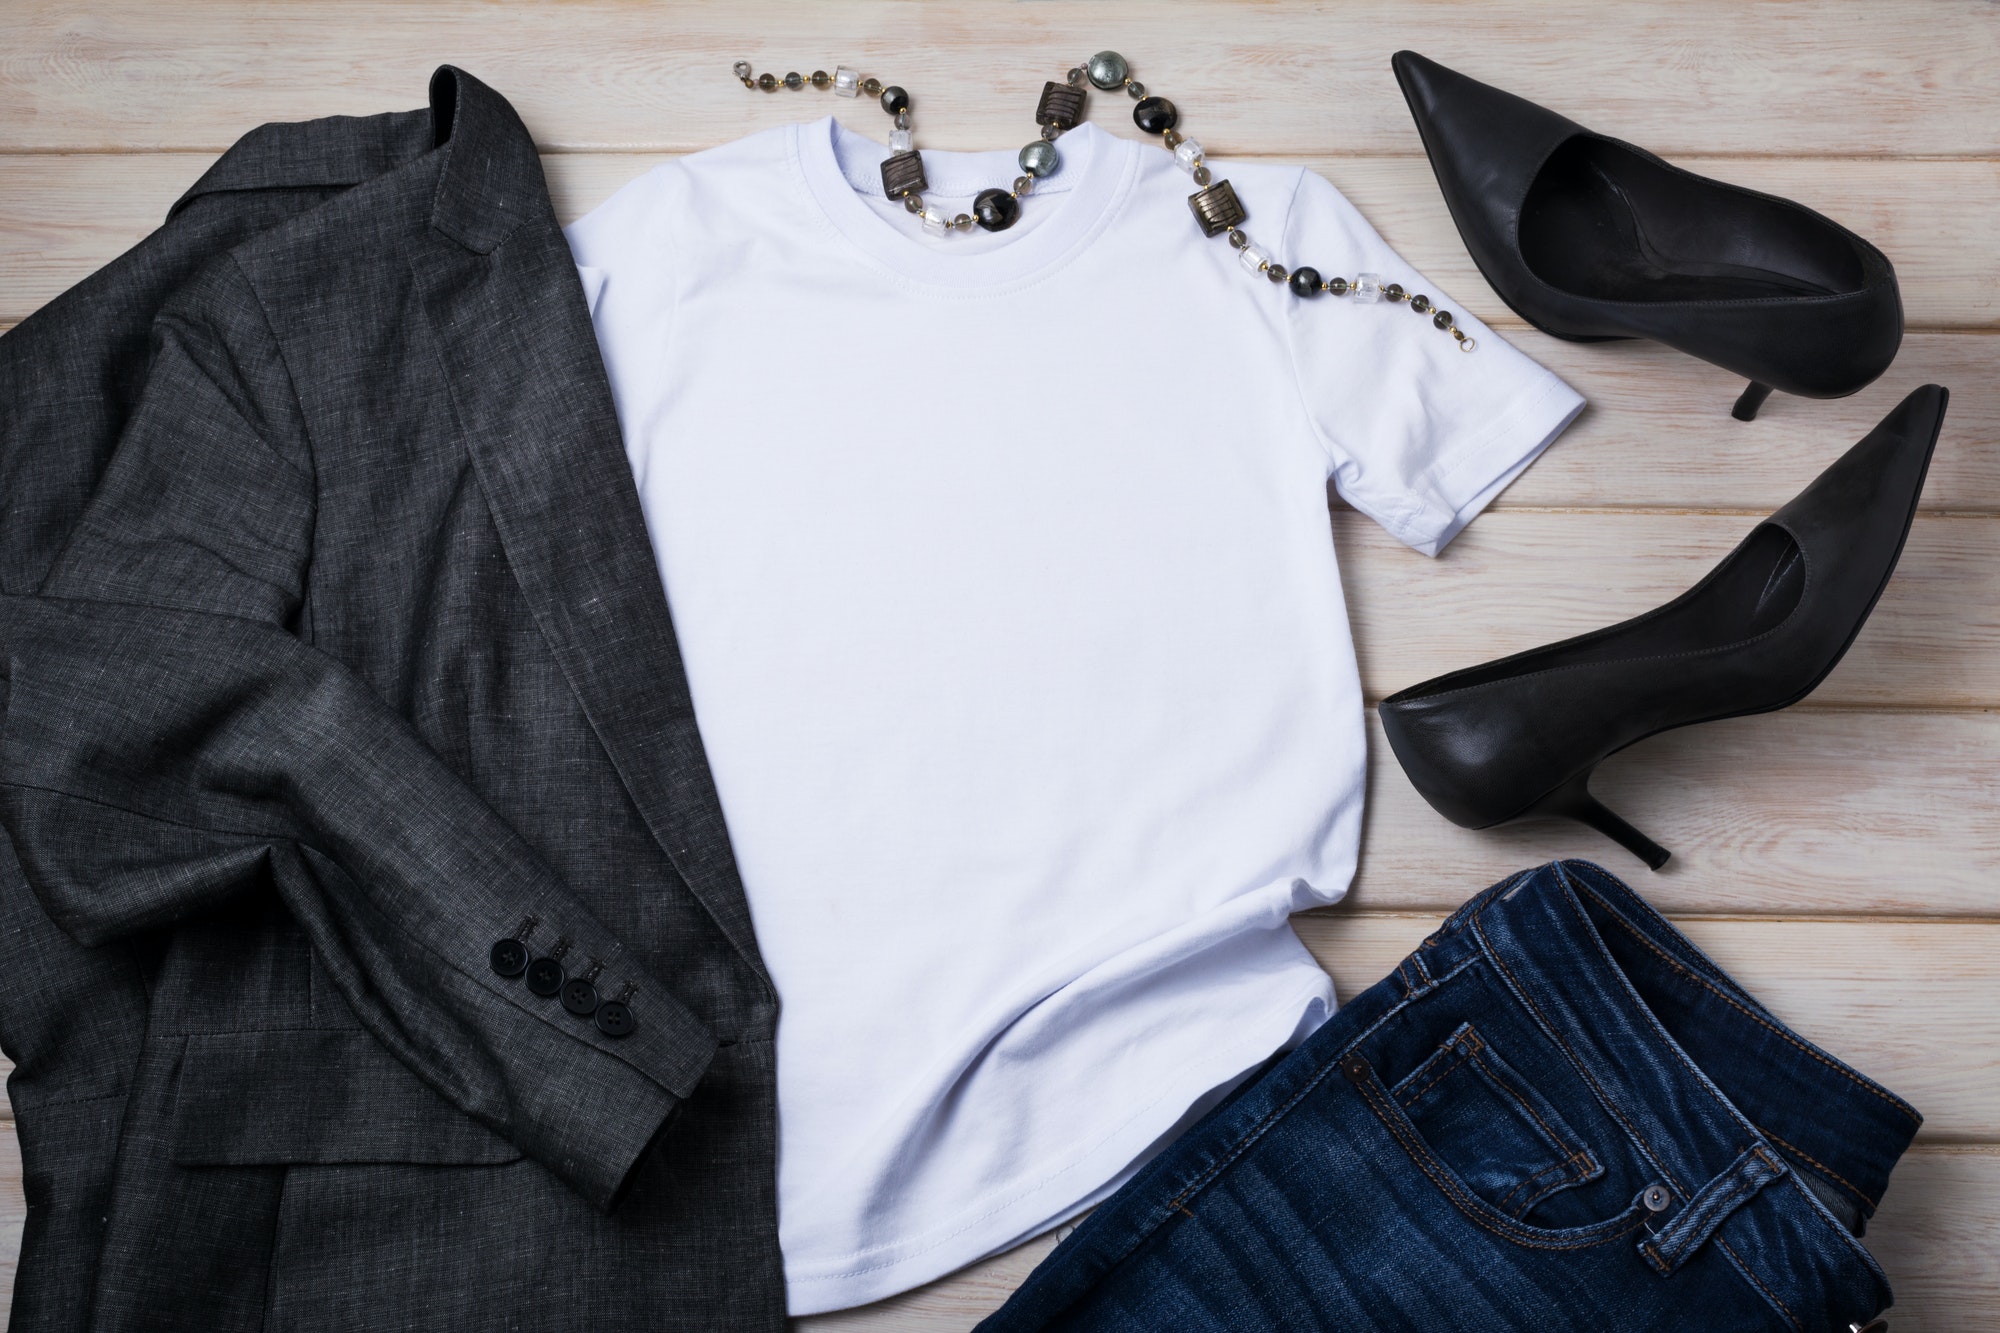 Women T-shirt mockup with high heels, murano necklace and blazer